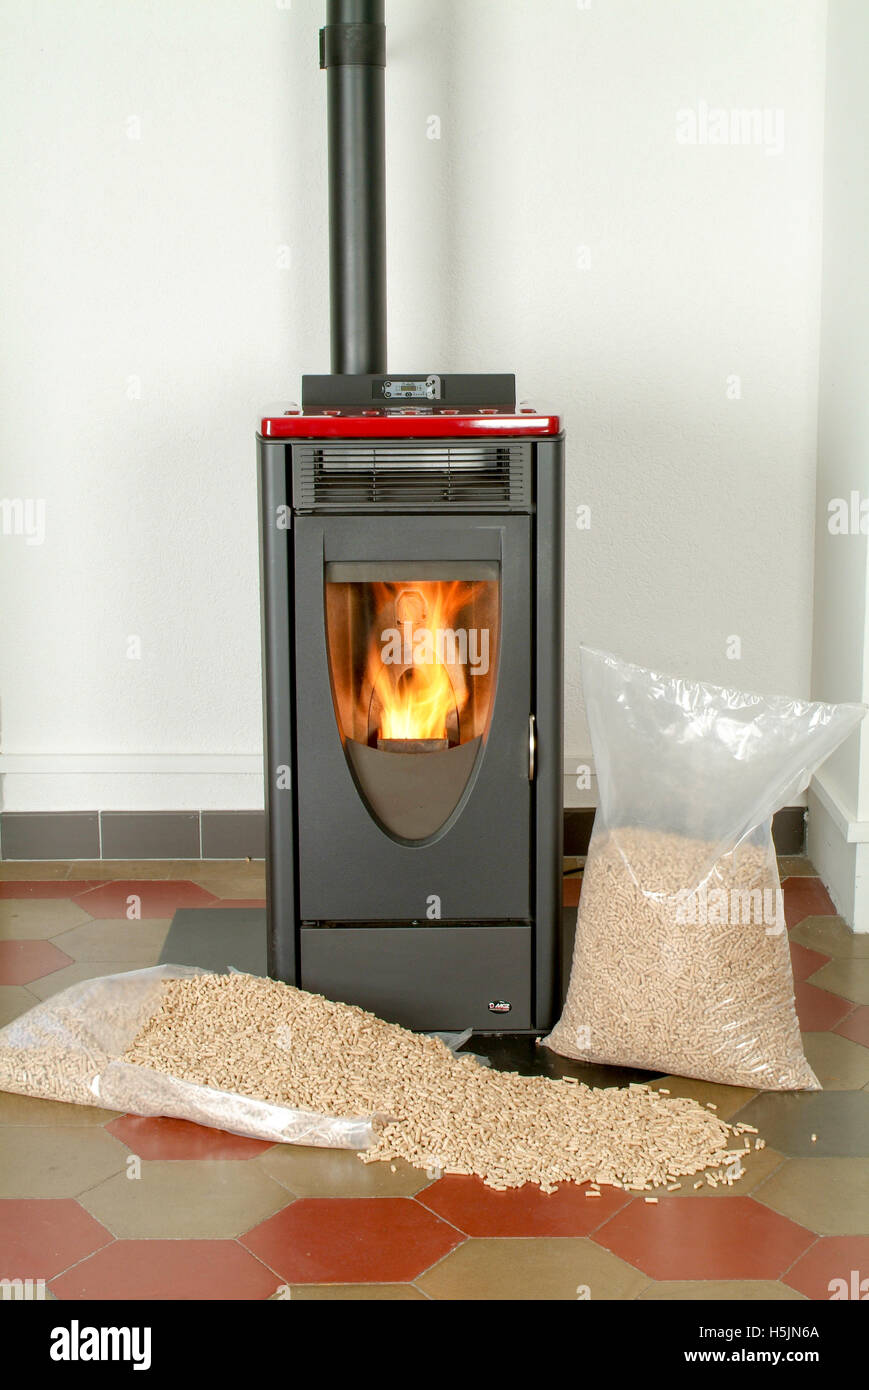 Modern domestic pellet stove with a burning flame and bags full of particle pellets Stock Photo